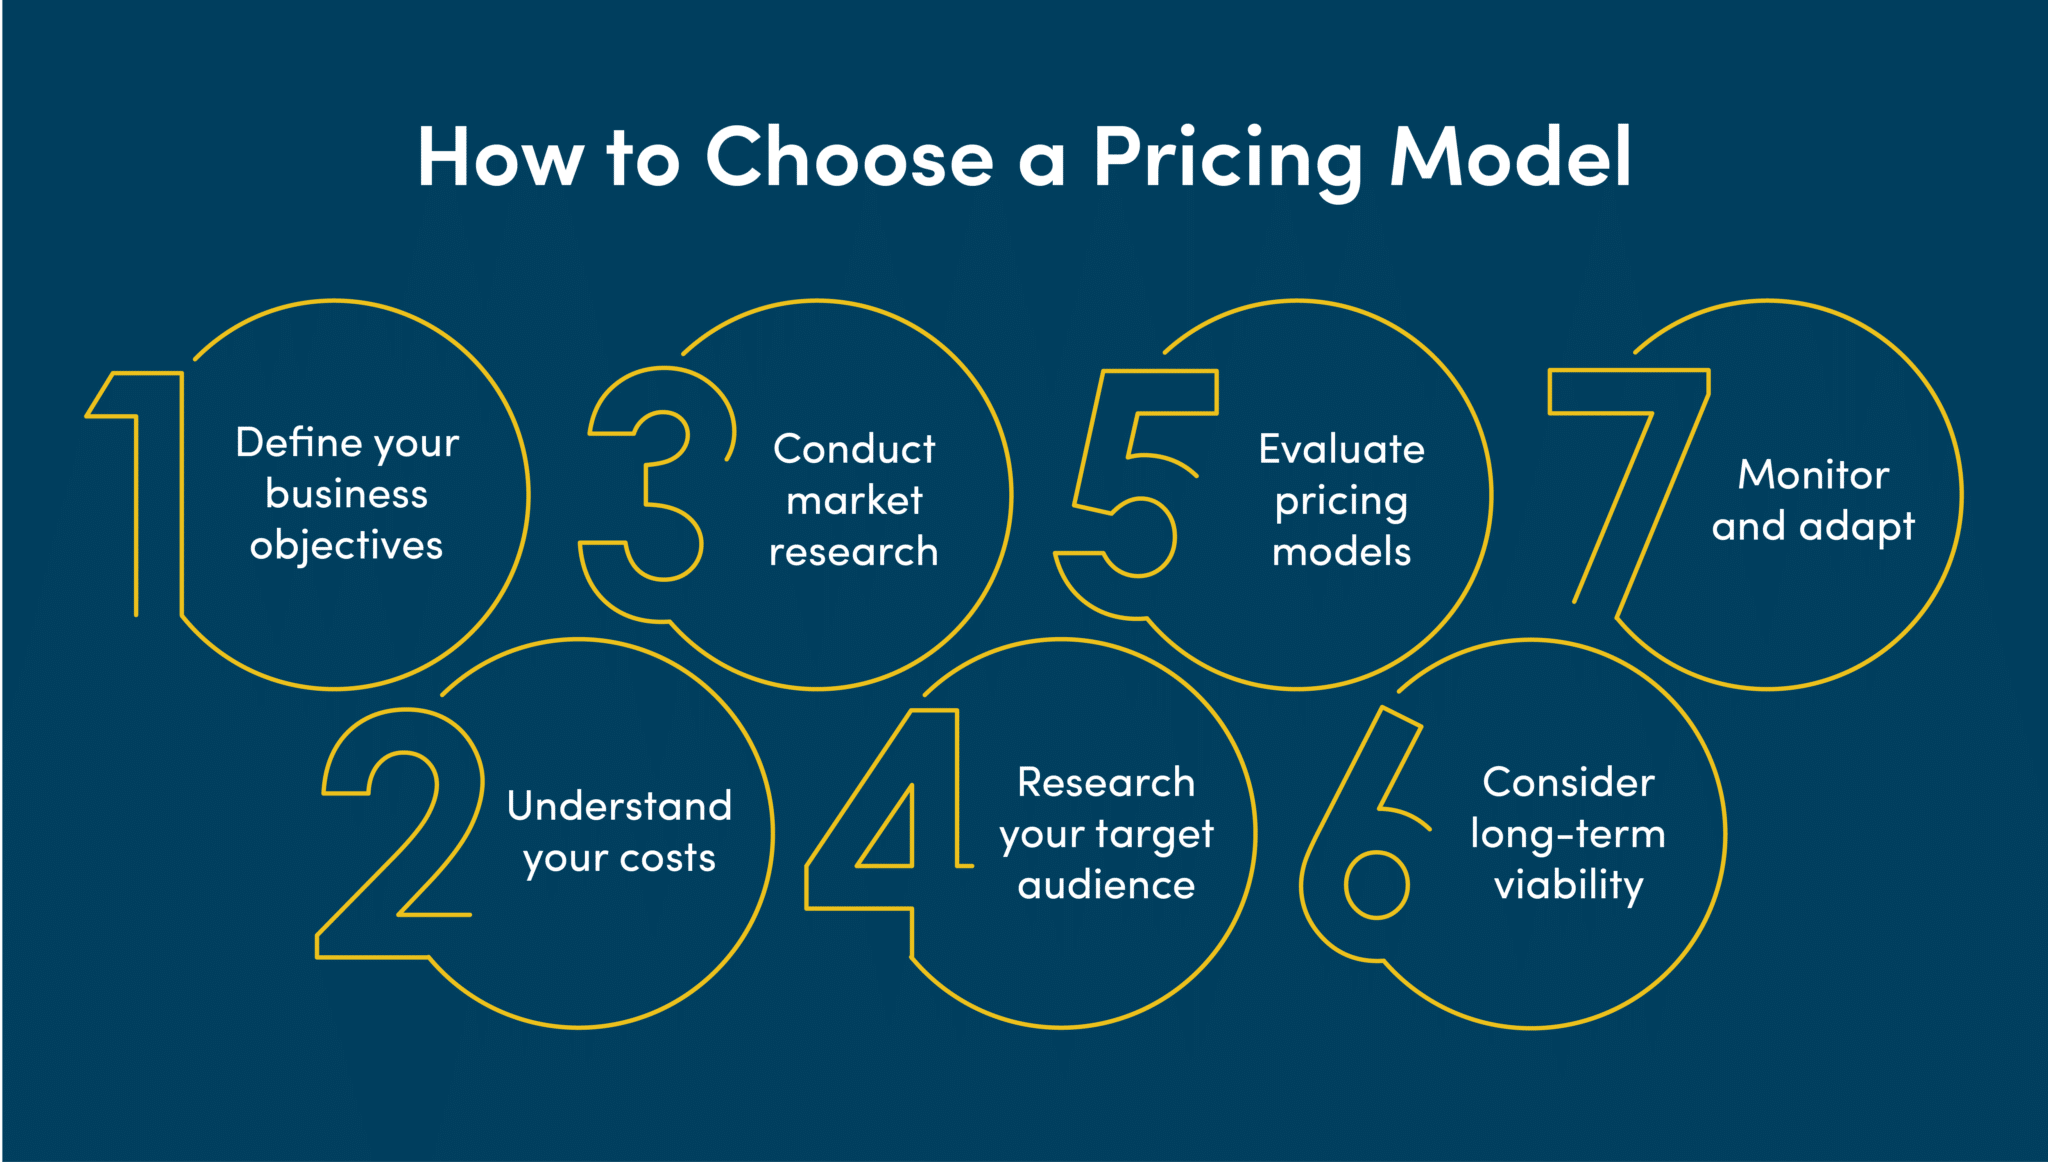 How to choose a pricing model